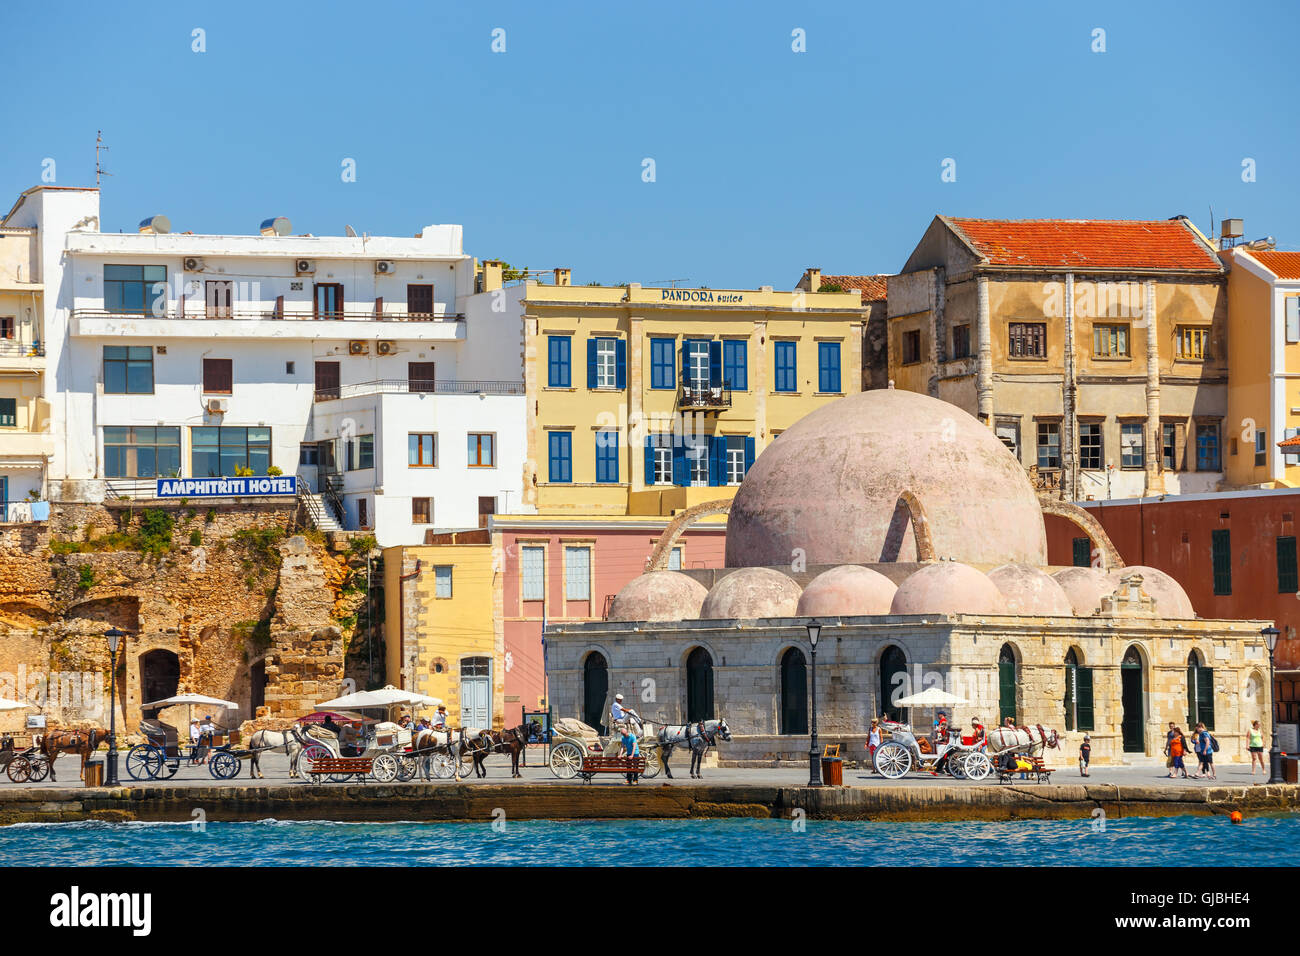 Chania, Crete - 25 Maj, 2016: Old harbor in Chania, Greece. Chania is the second largest city of Crete. Stock Photo